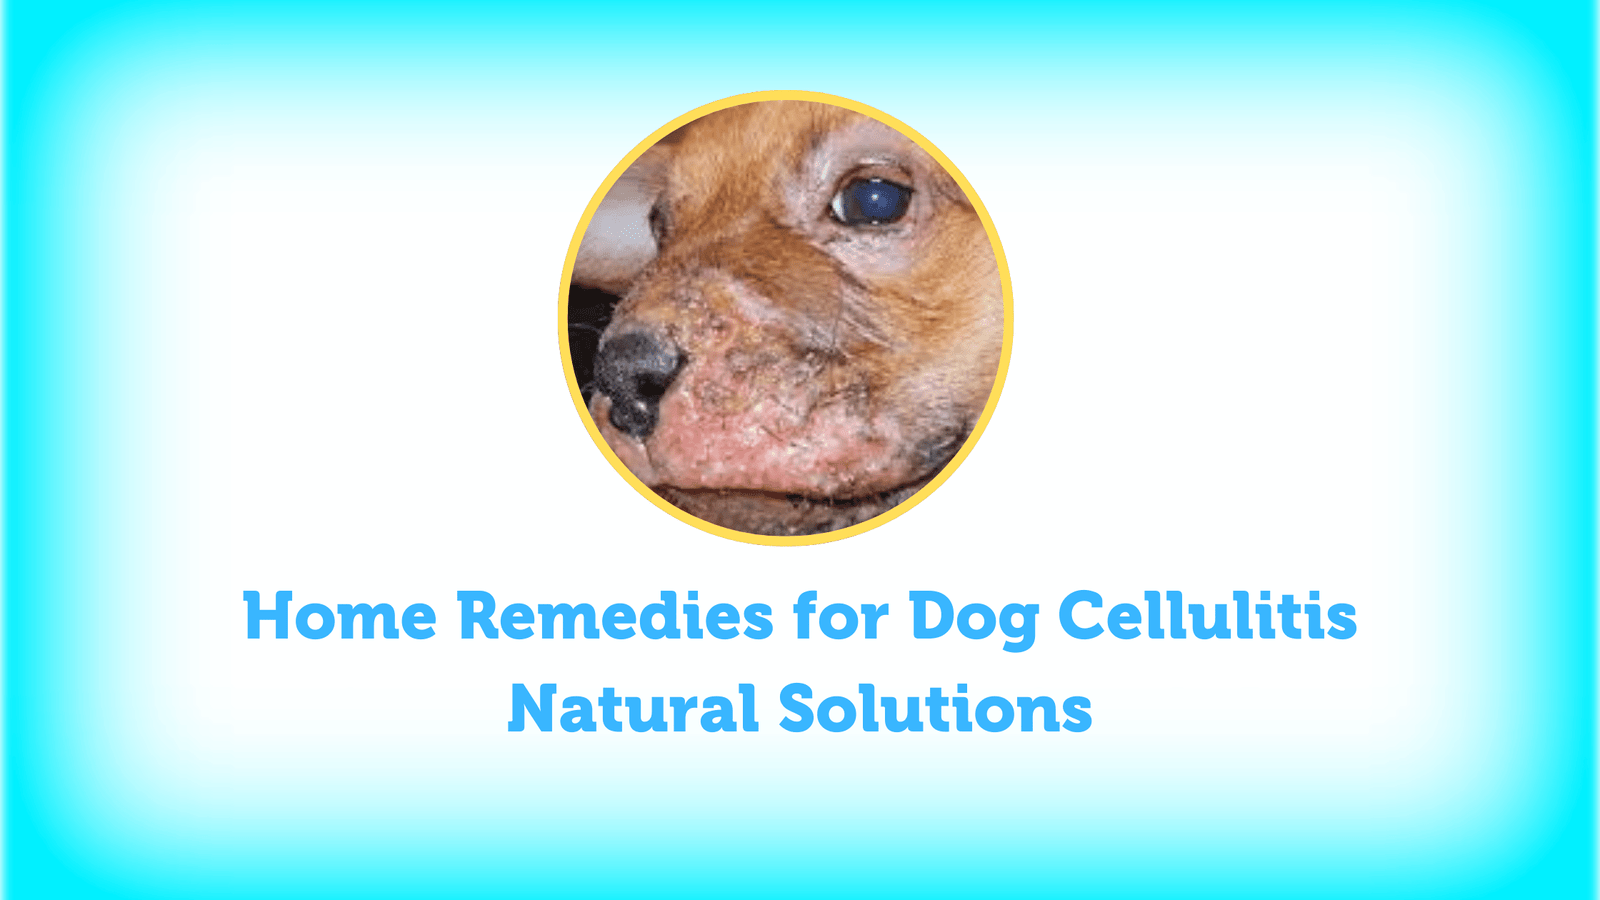 Home Remedies for Dog Cellulitis